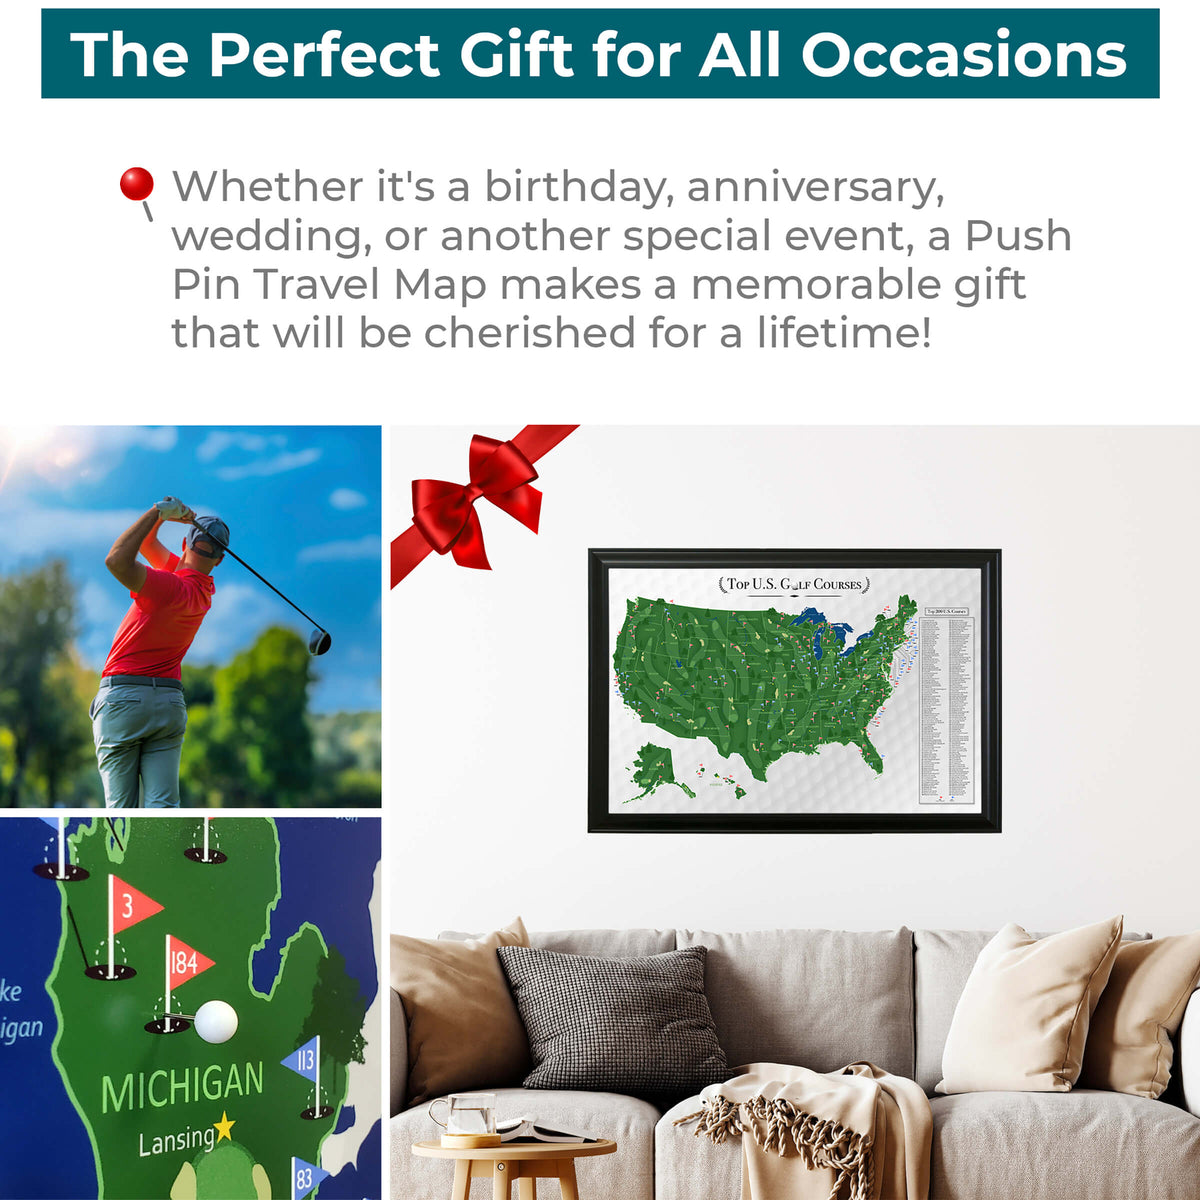 Top 200 Golf Courses USA Push Pin Travel Maps - The Perfect Gift